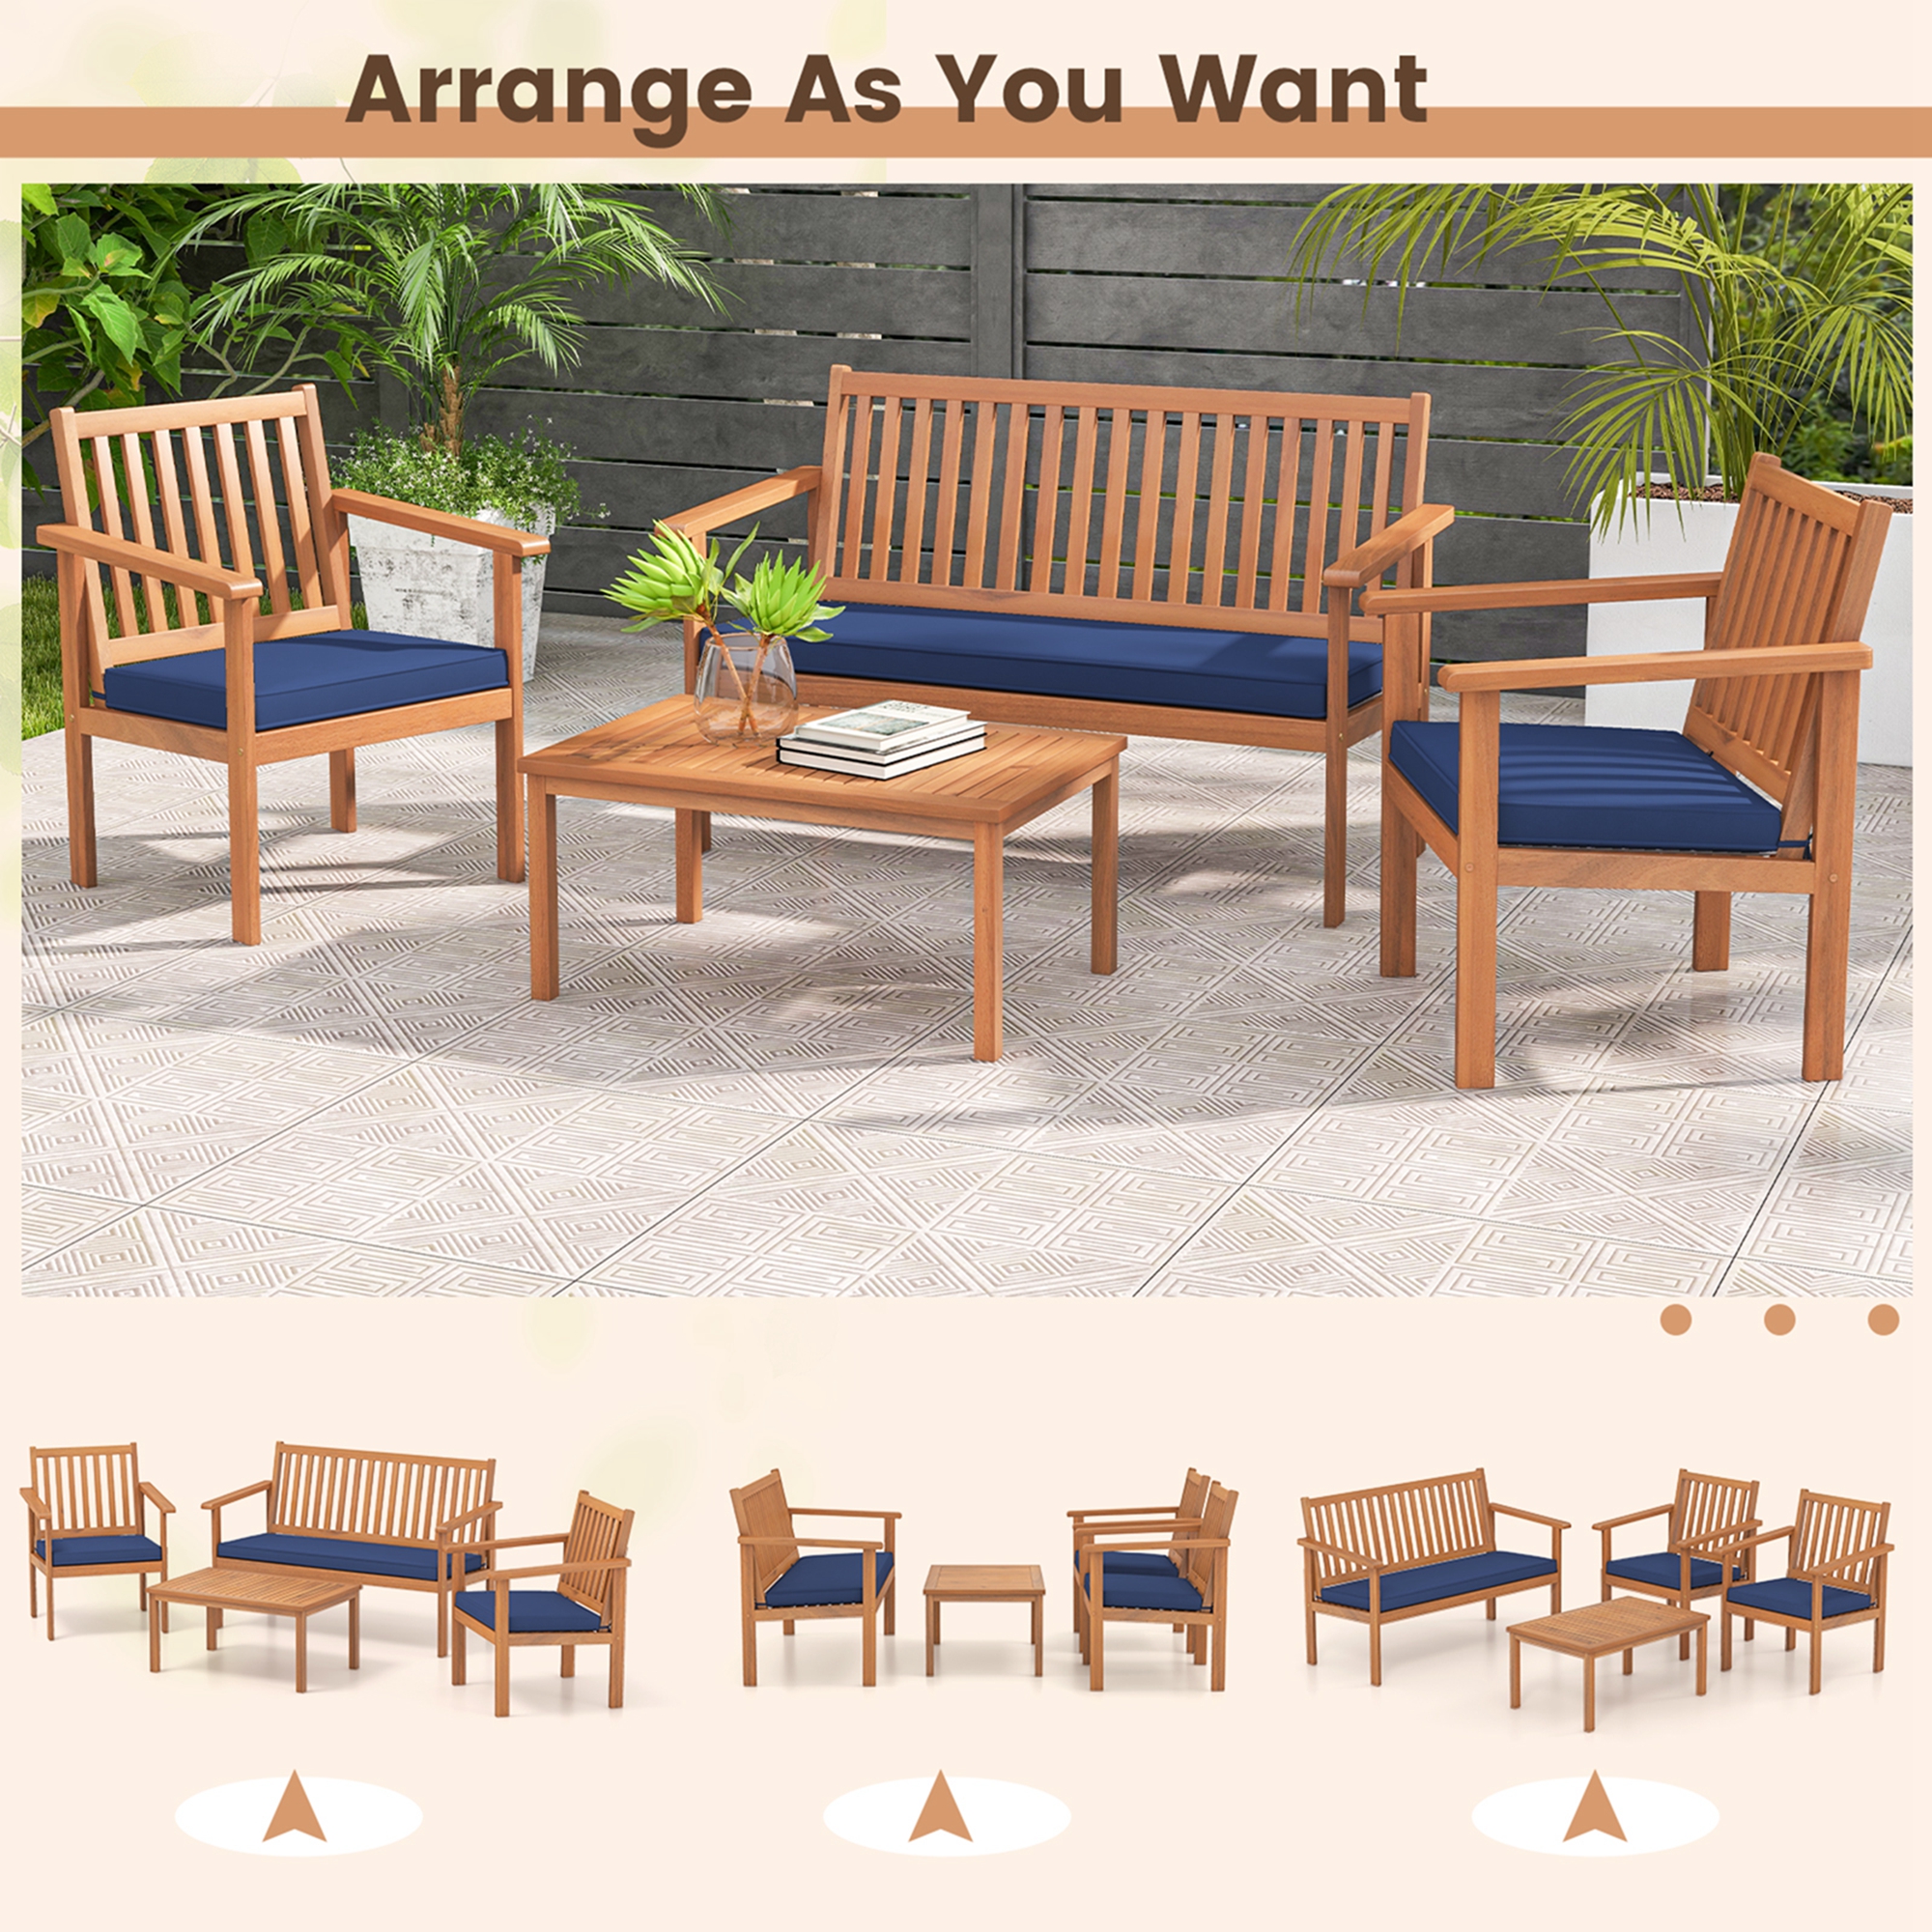 Costway 4 PCS Patio Wood Furniture Set with Loveseat, 2 Chairs & Coffee Table for Porch Navy - image 5 of 10